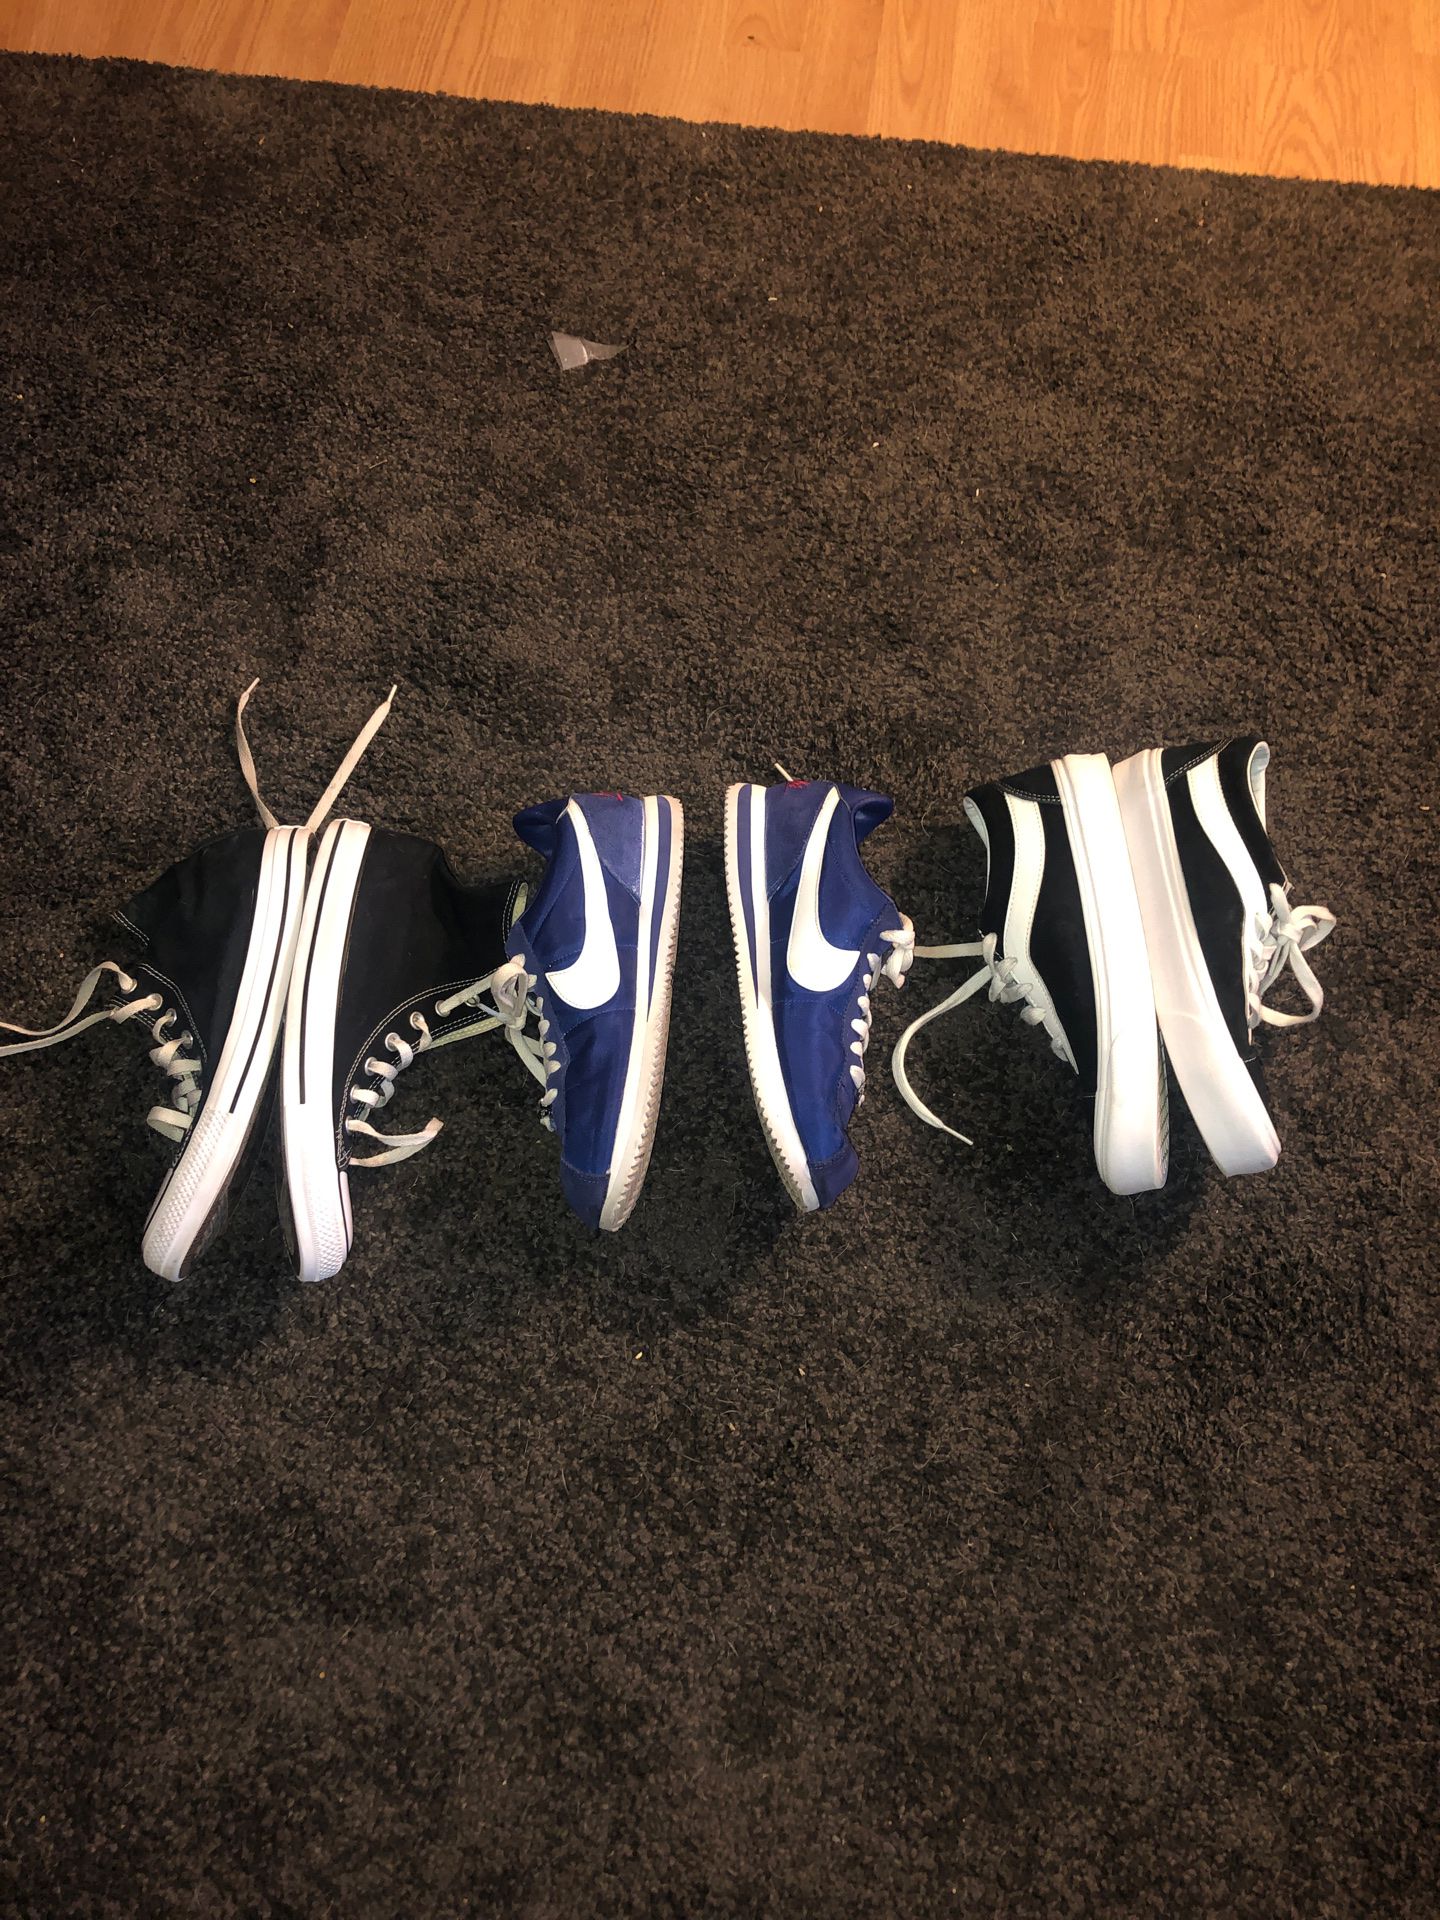 3 pairs for $80: Size 8.5 Cortez, converse, and Vans.